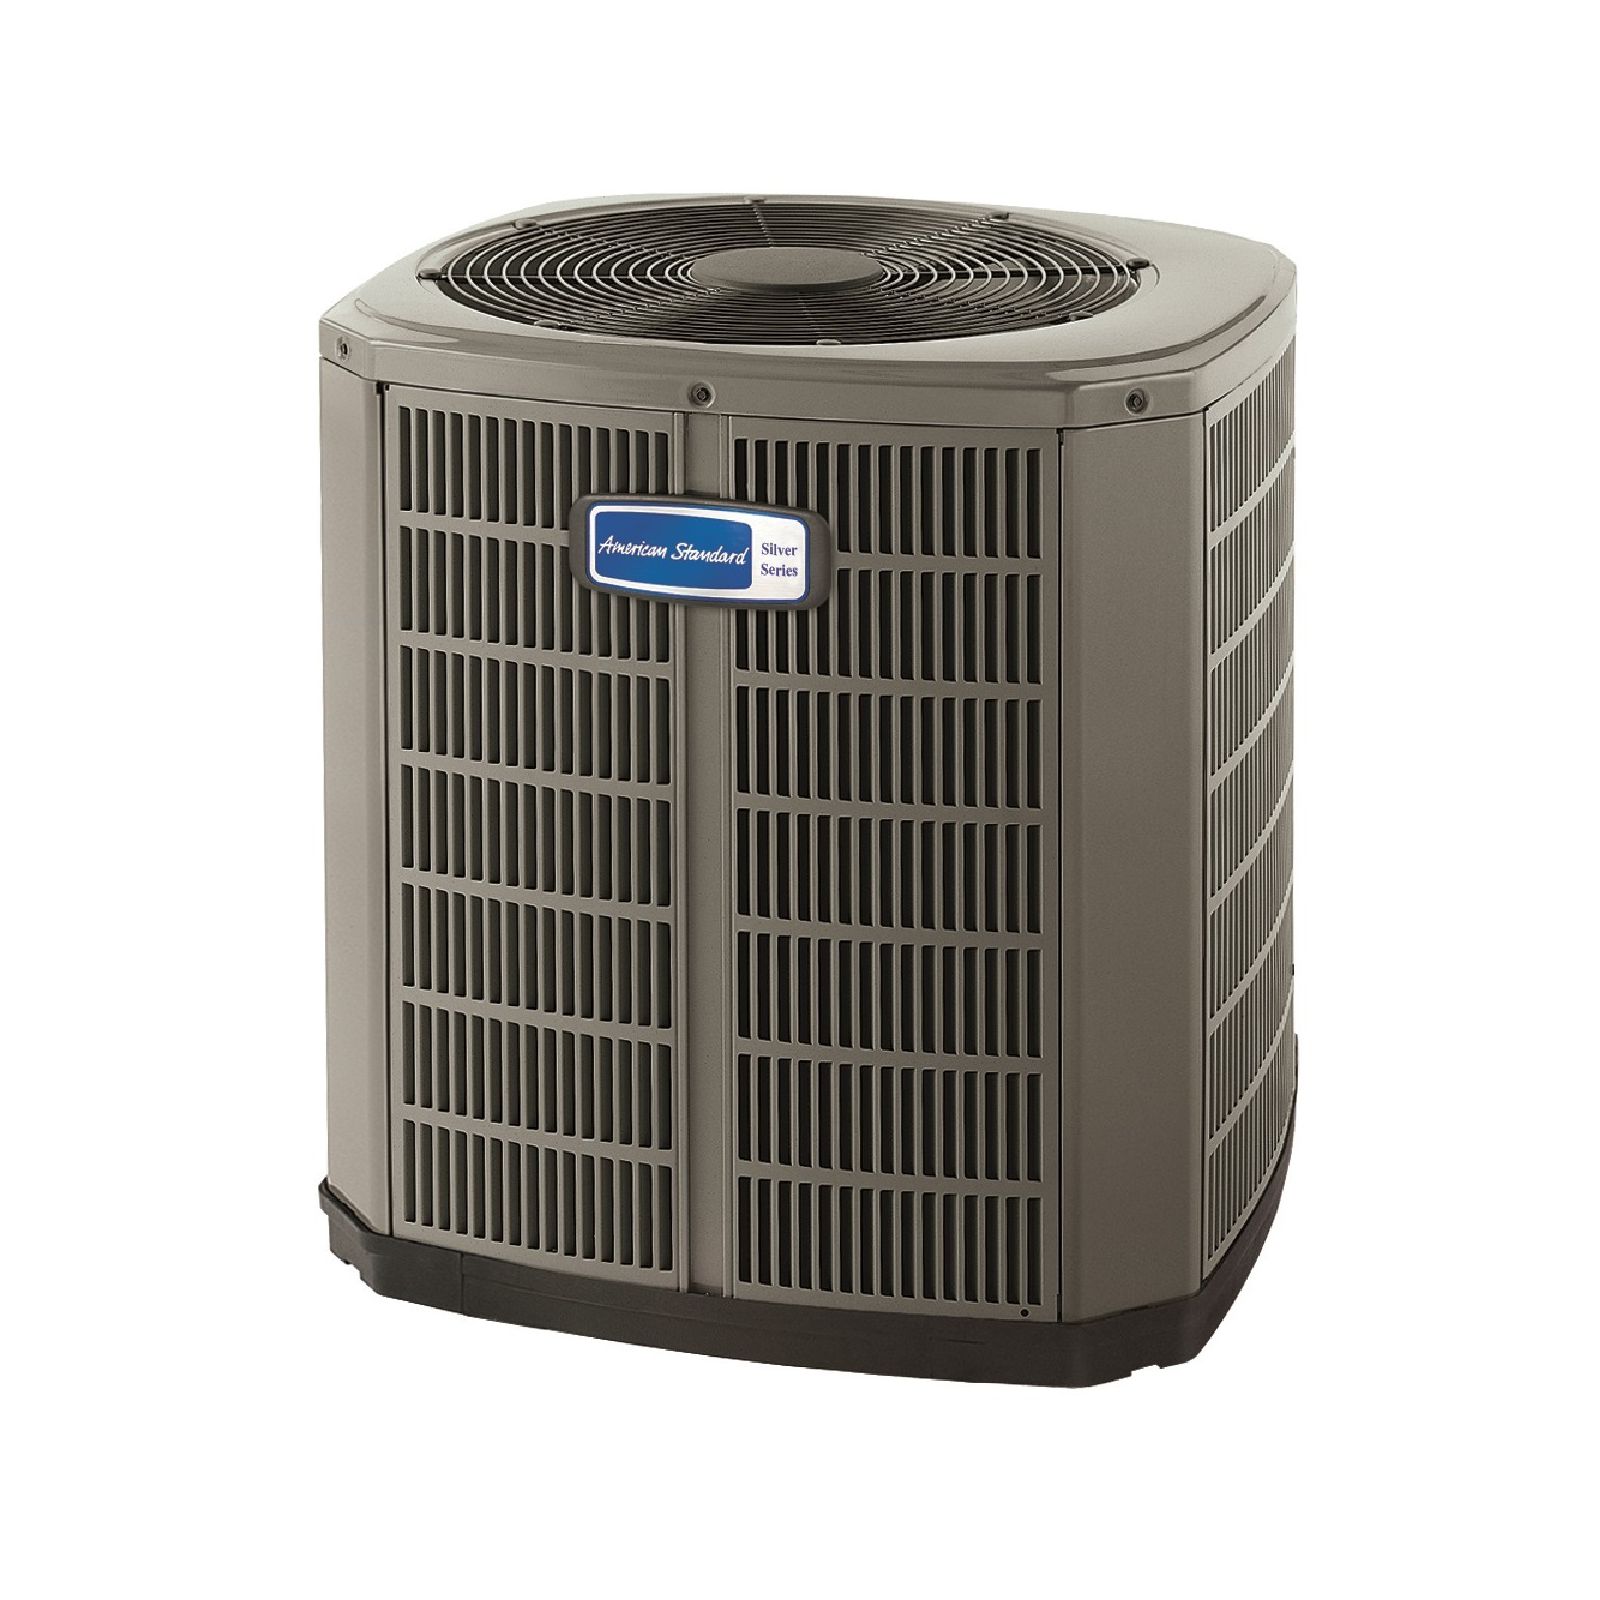 American Standard Heating & Cooling 2 Ton Air Conditioner 1634402